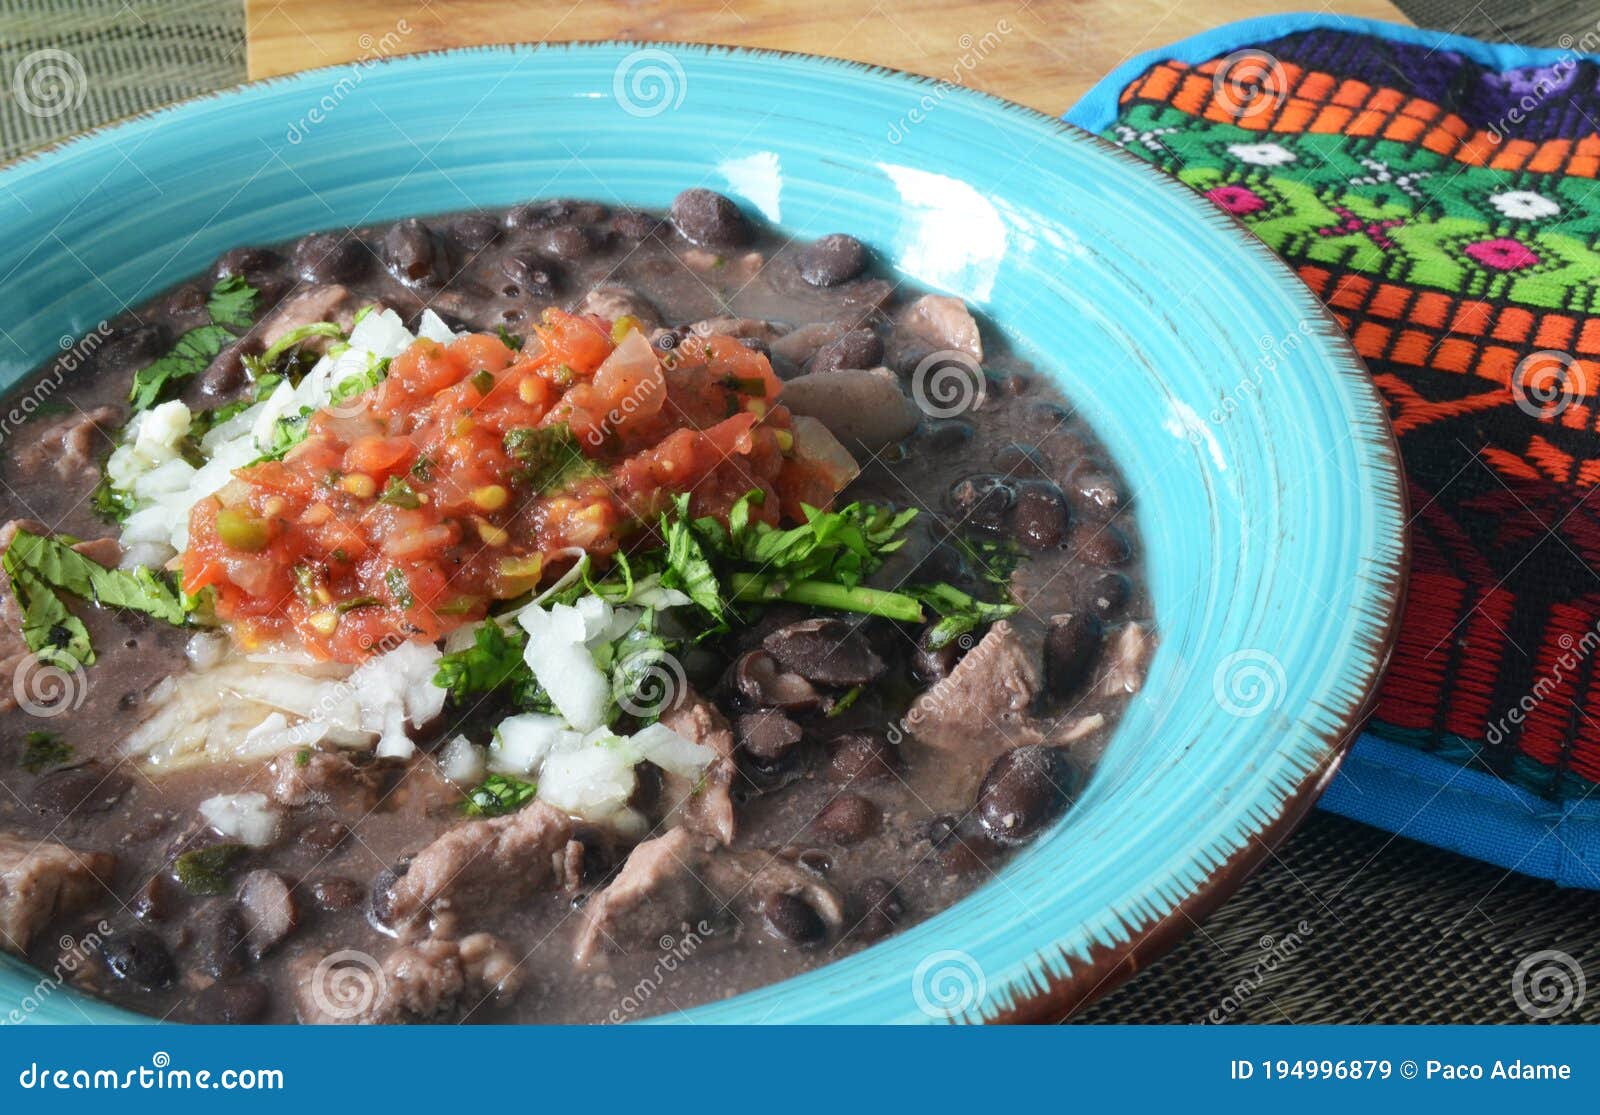 mexican food pork and beans, frijol con puerco, traditional mexican food from yucatan